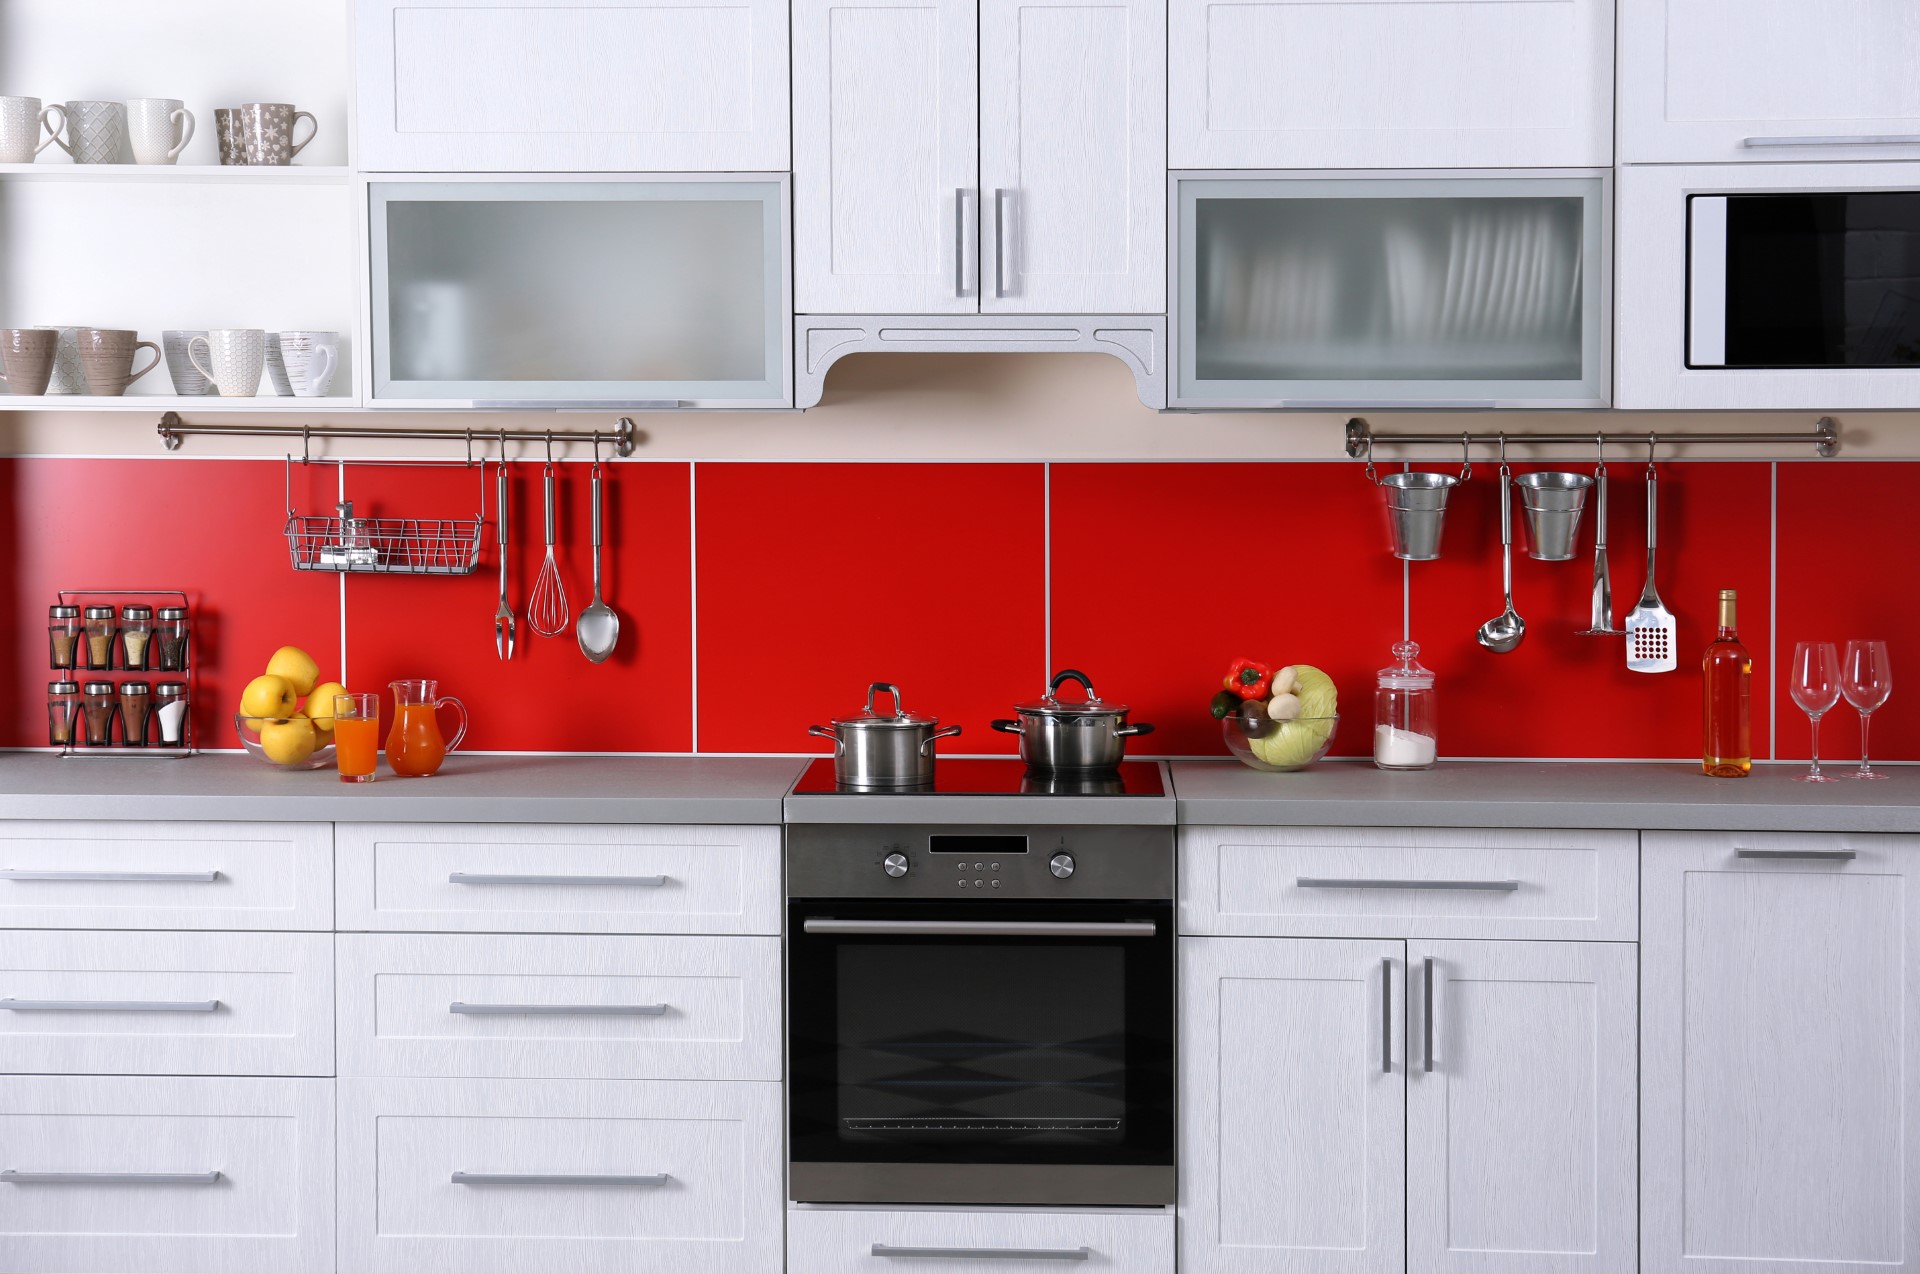 If you're looking for a design that shows character and personality, there's no better way to show it than a bright color like red as a backsplash to your countertop. Something like this would be great for a college dorm, or just an all-around fun person.